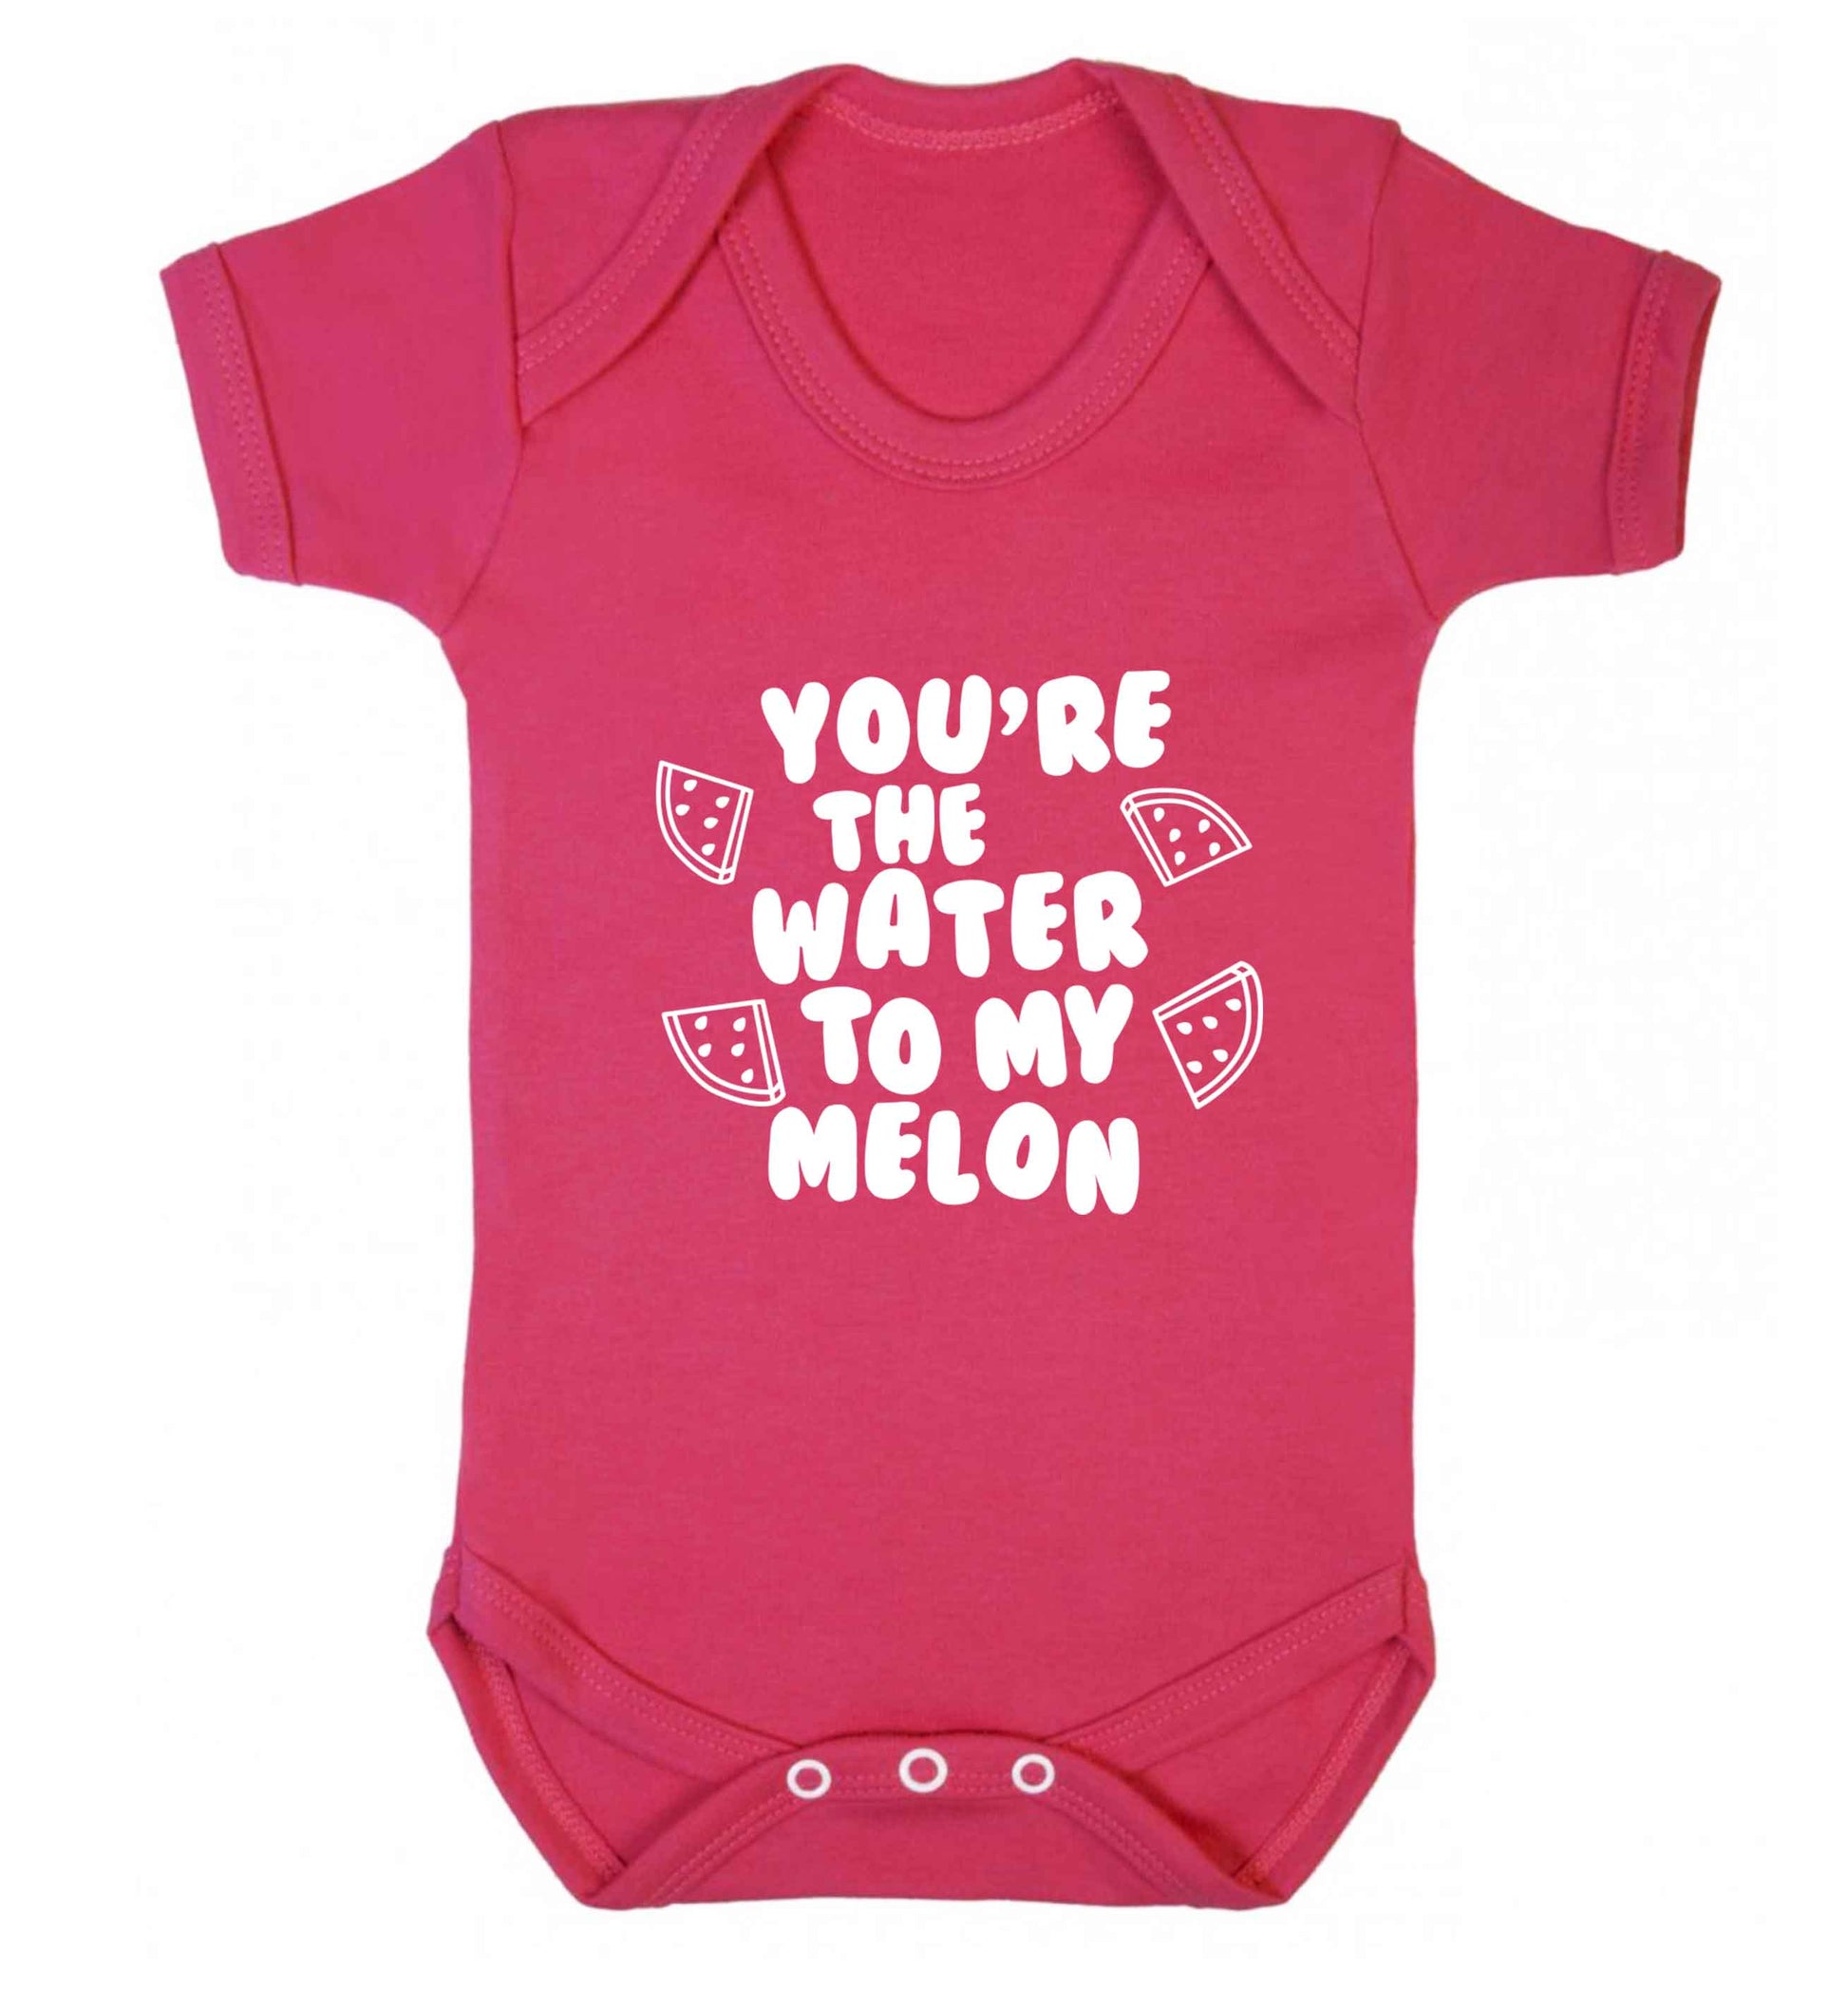 You're the water to my melon baby vest dark pink 18-24 months